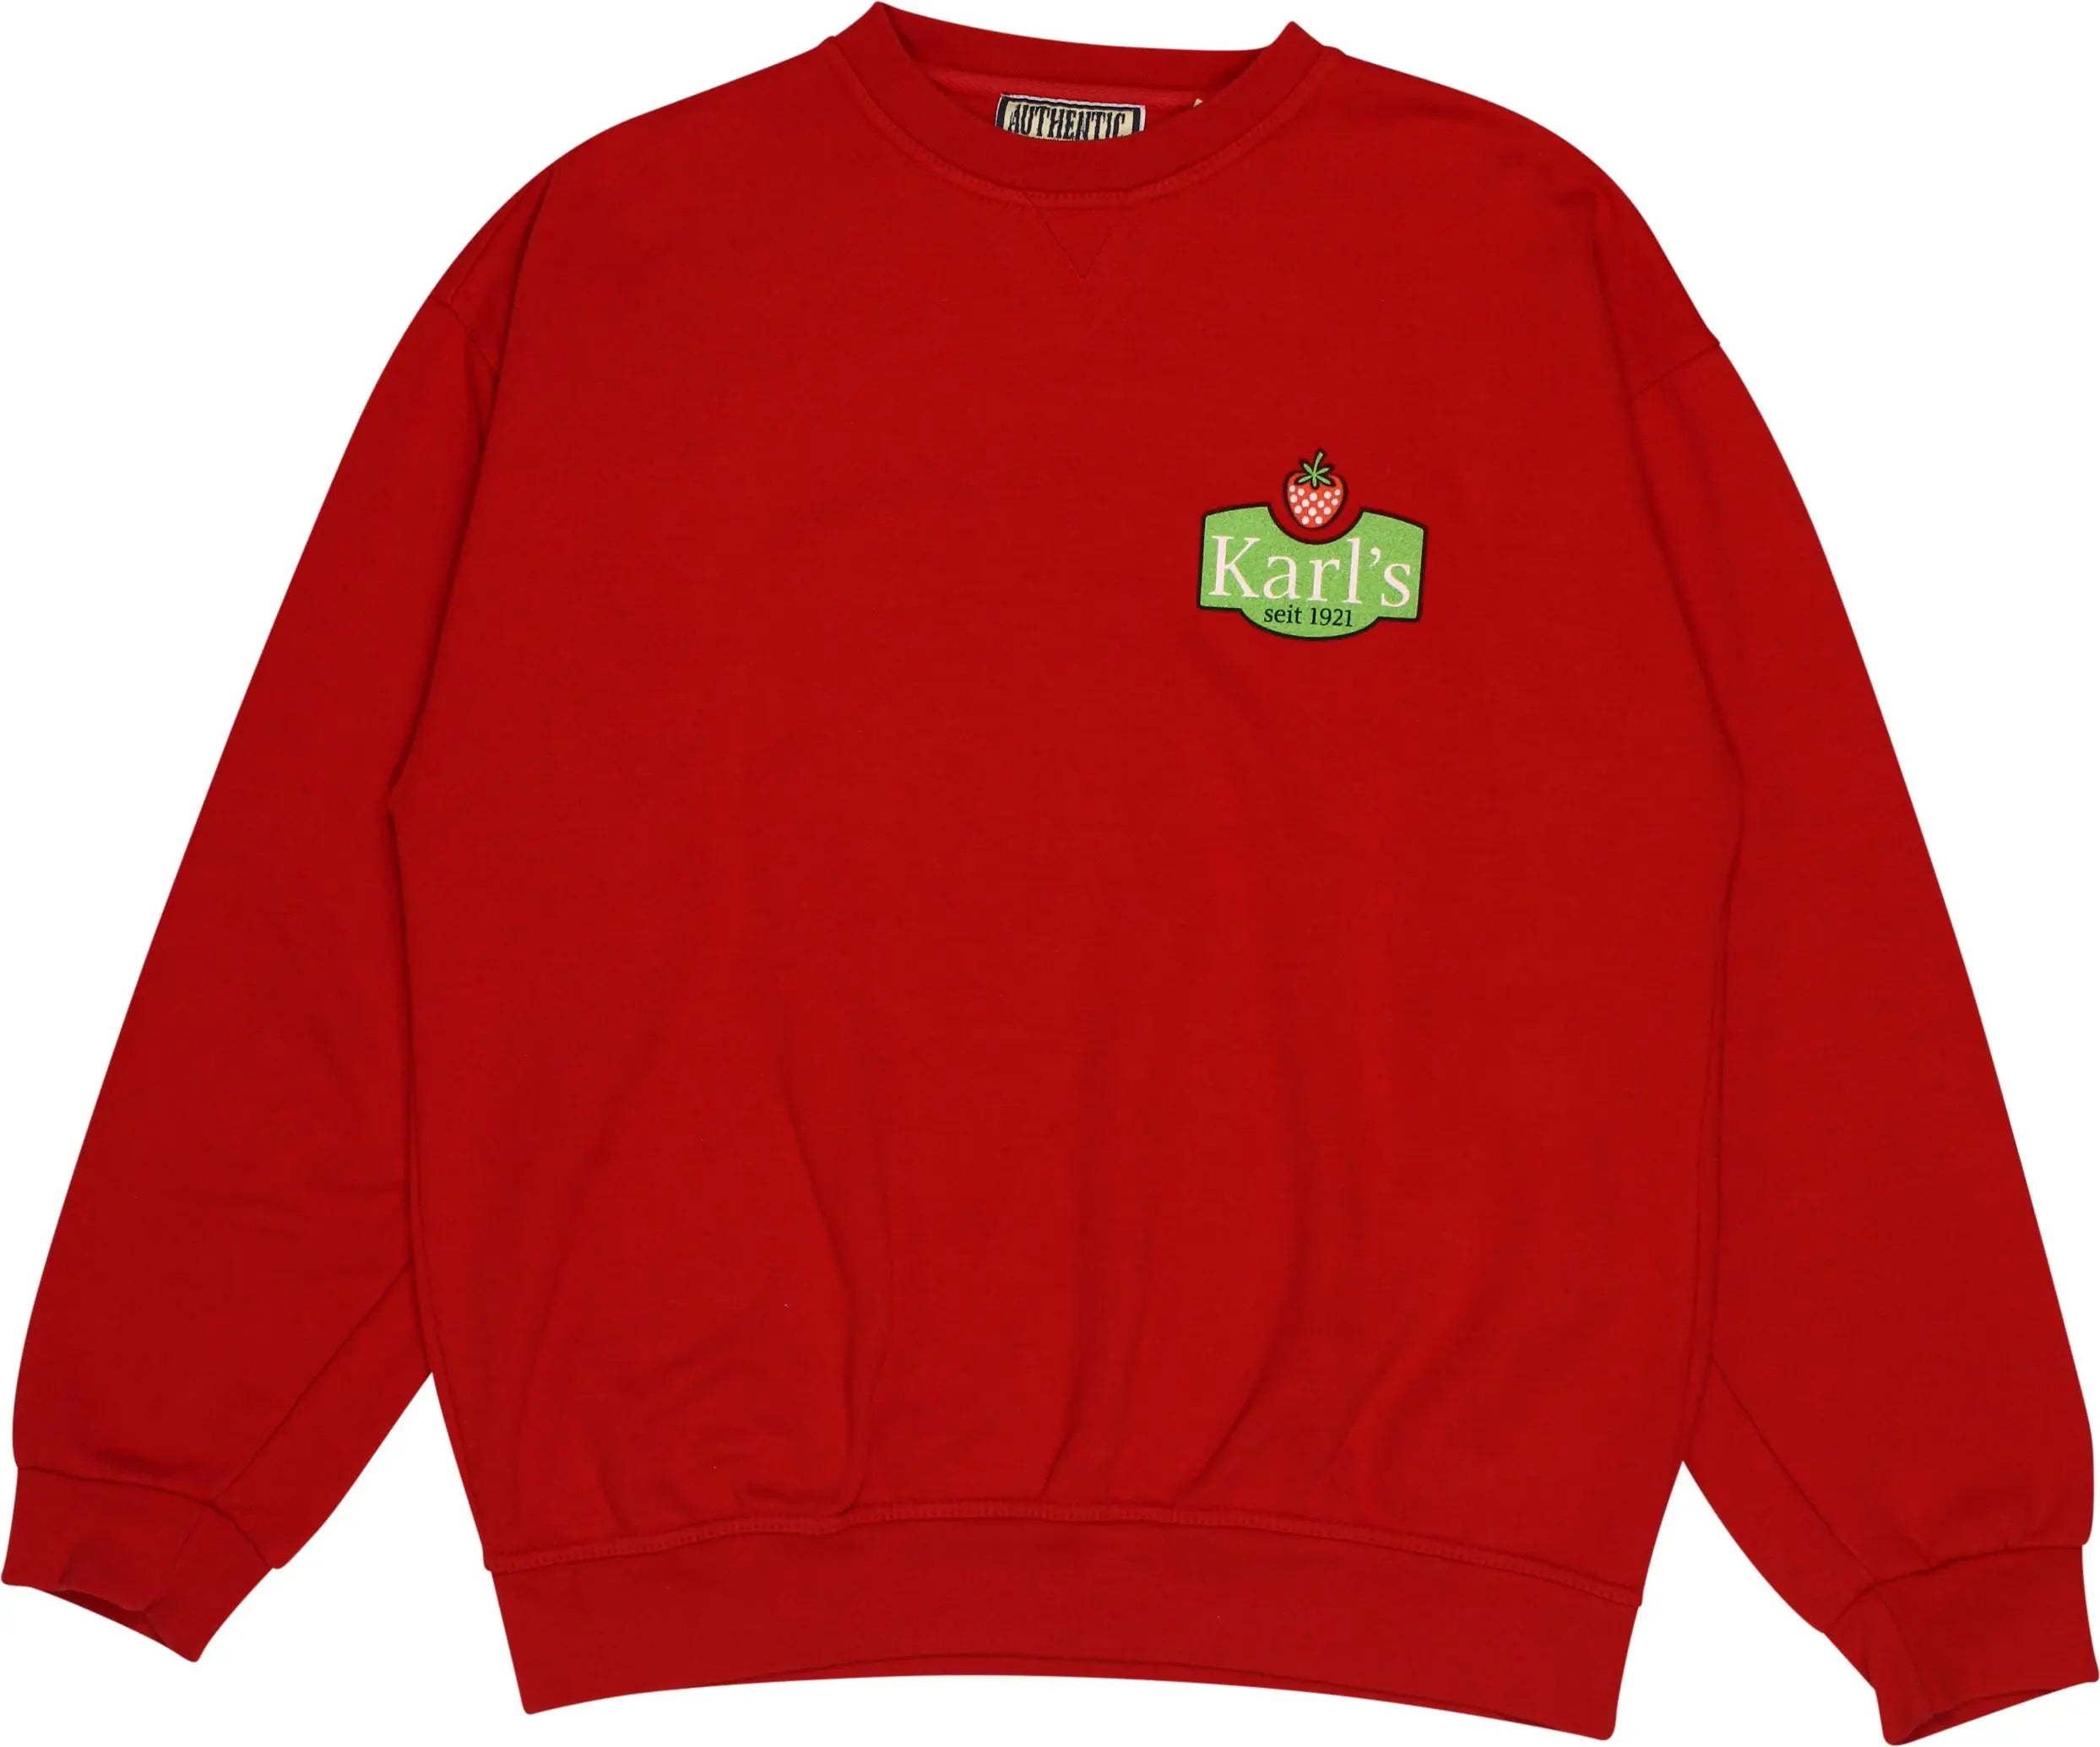 Authentic - Karl's Merchandise Sweater- ThriftTale.com - Vintage and second handclothing